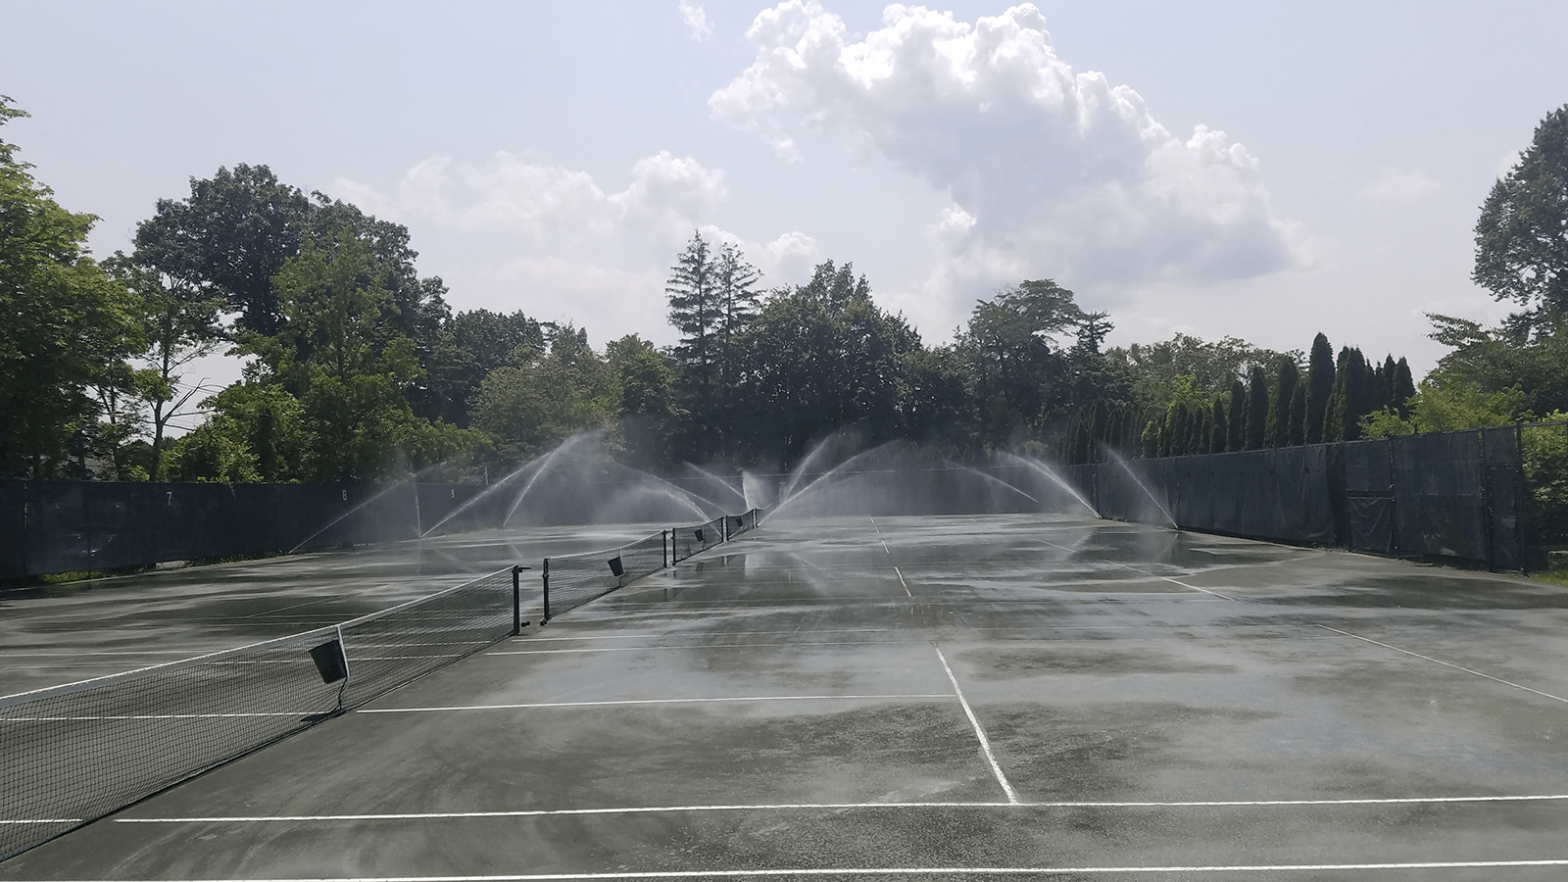 sprinkler on clay tennis courts at Quaker Ridge